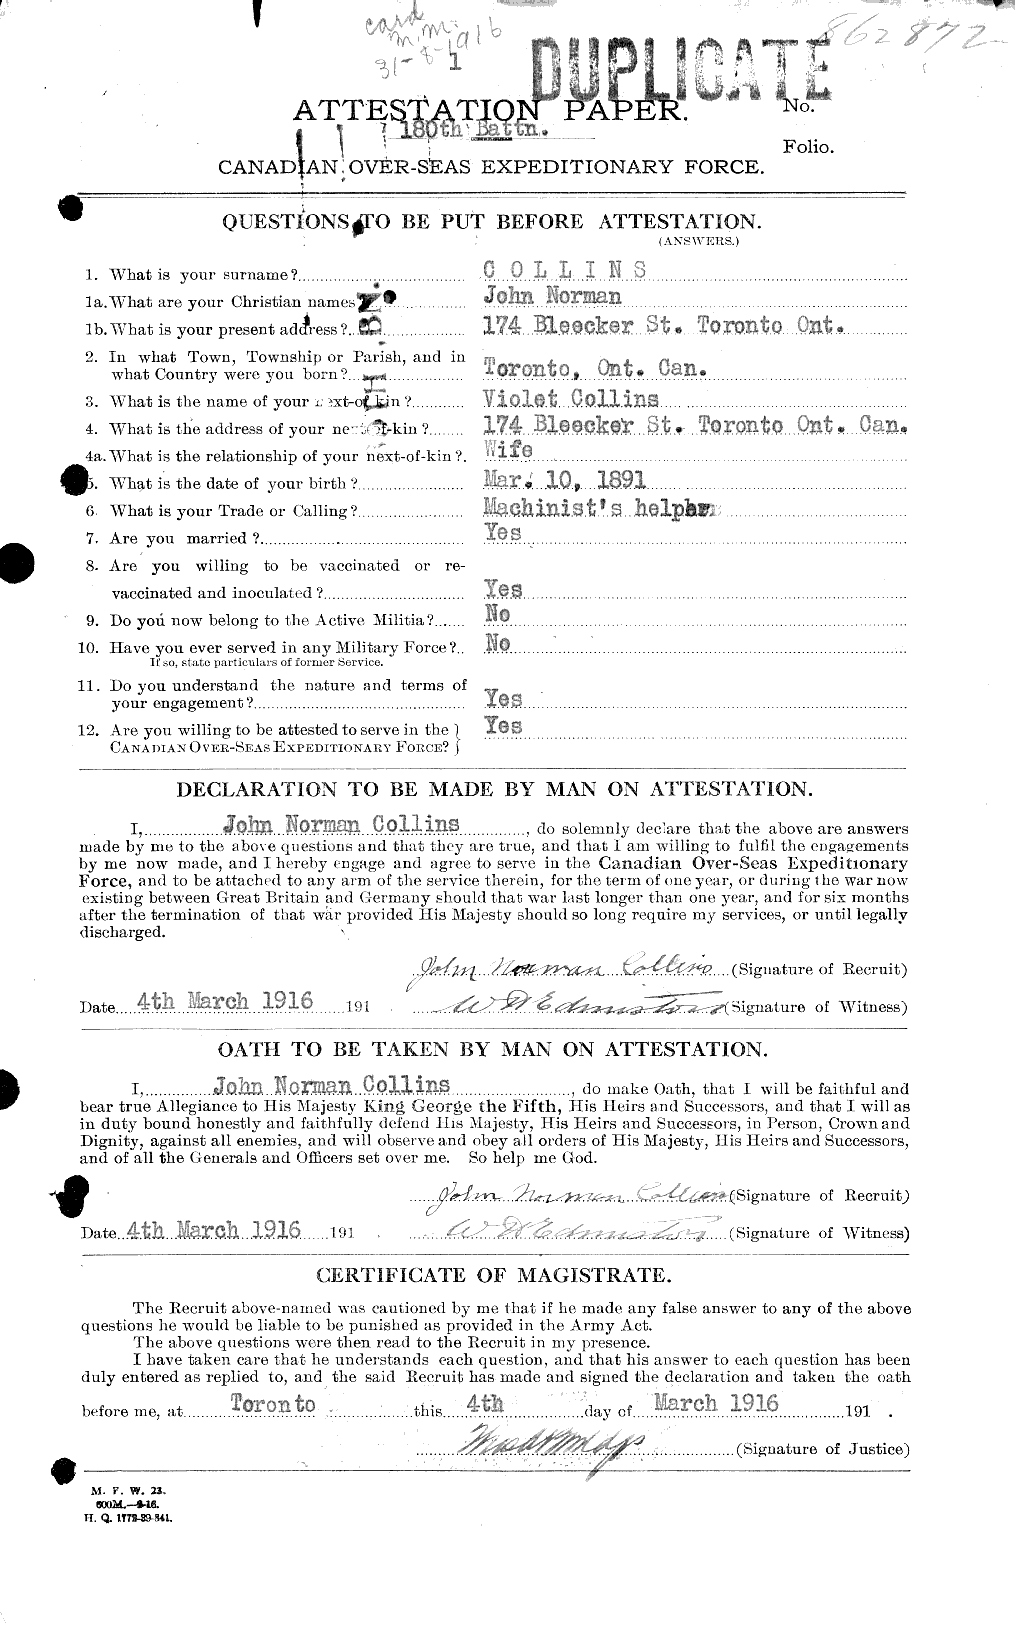 Personnel Records of the First World War - CEF 034394a